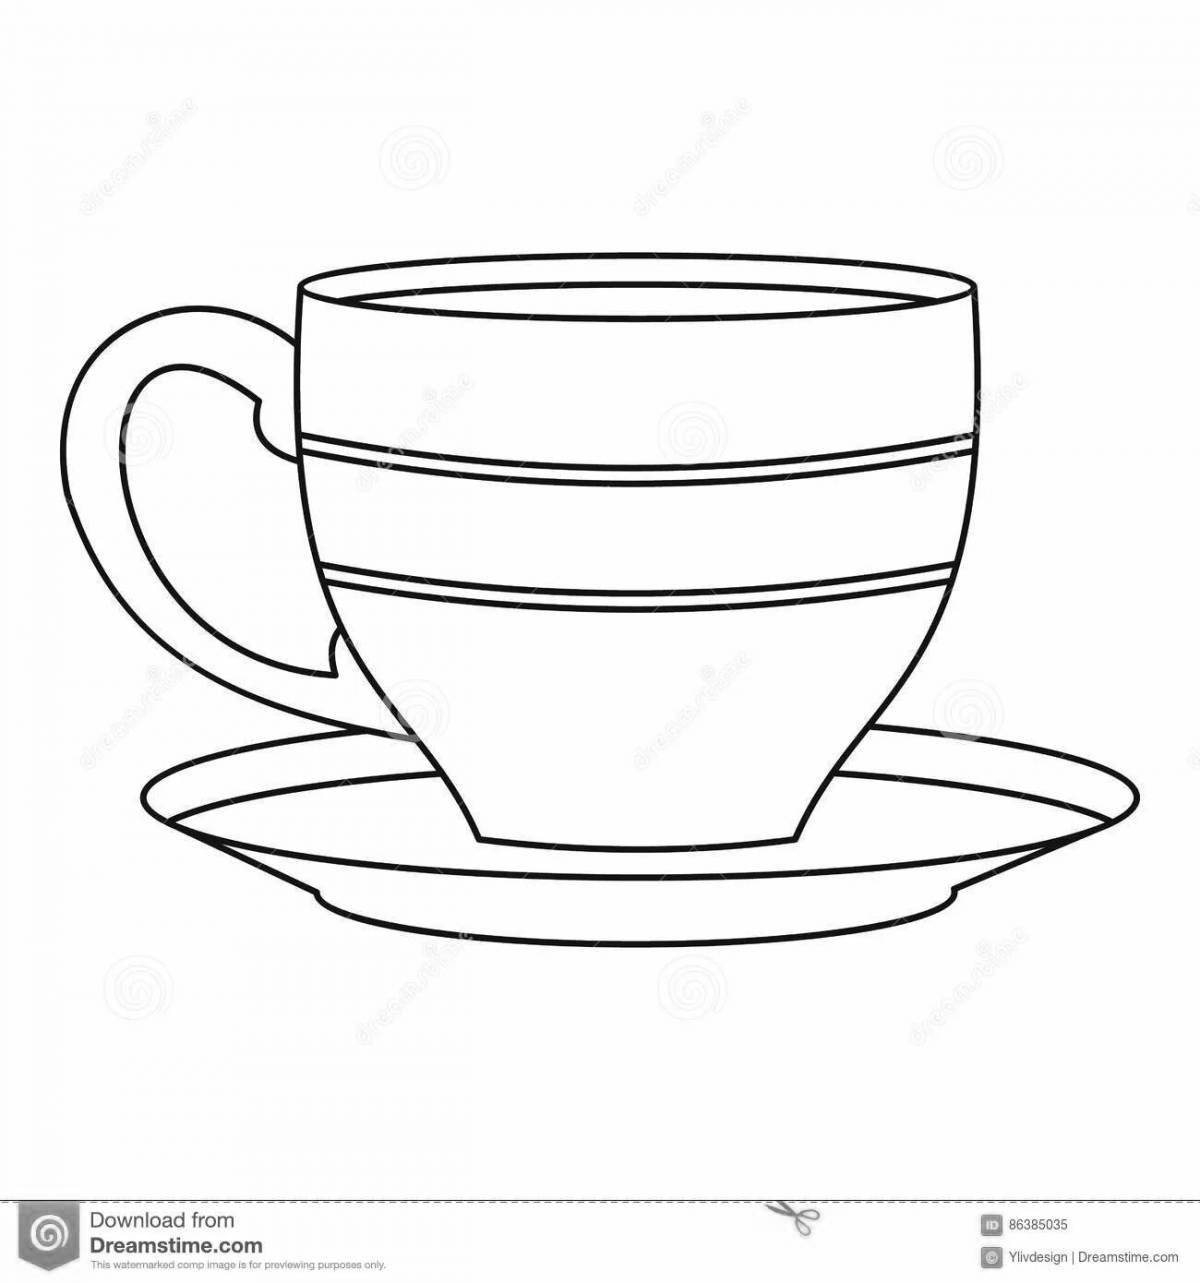 Adorable cup and saucer coloring book for preschoolers